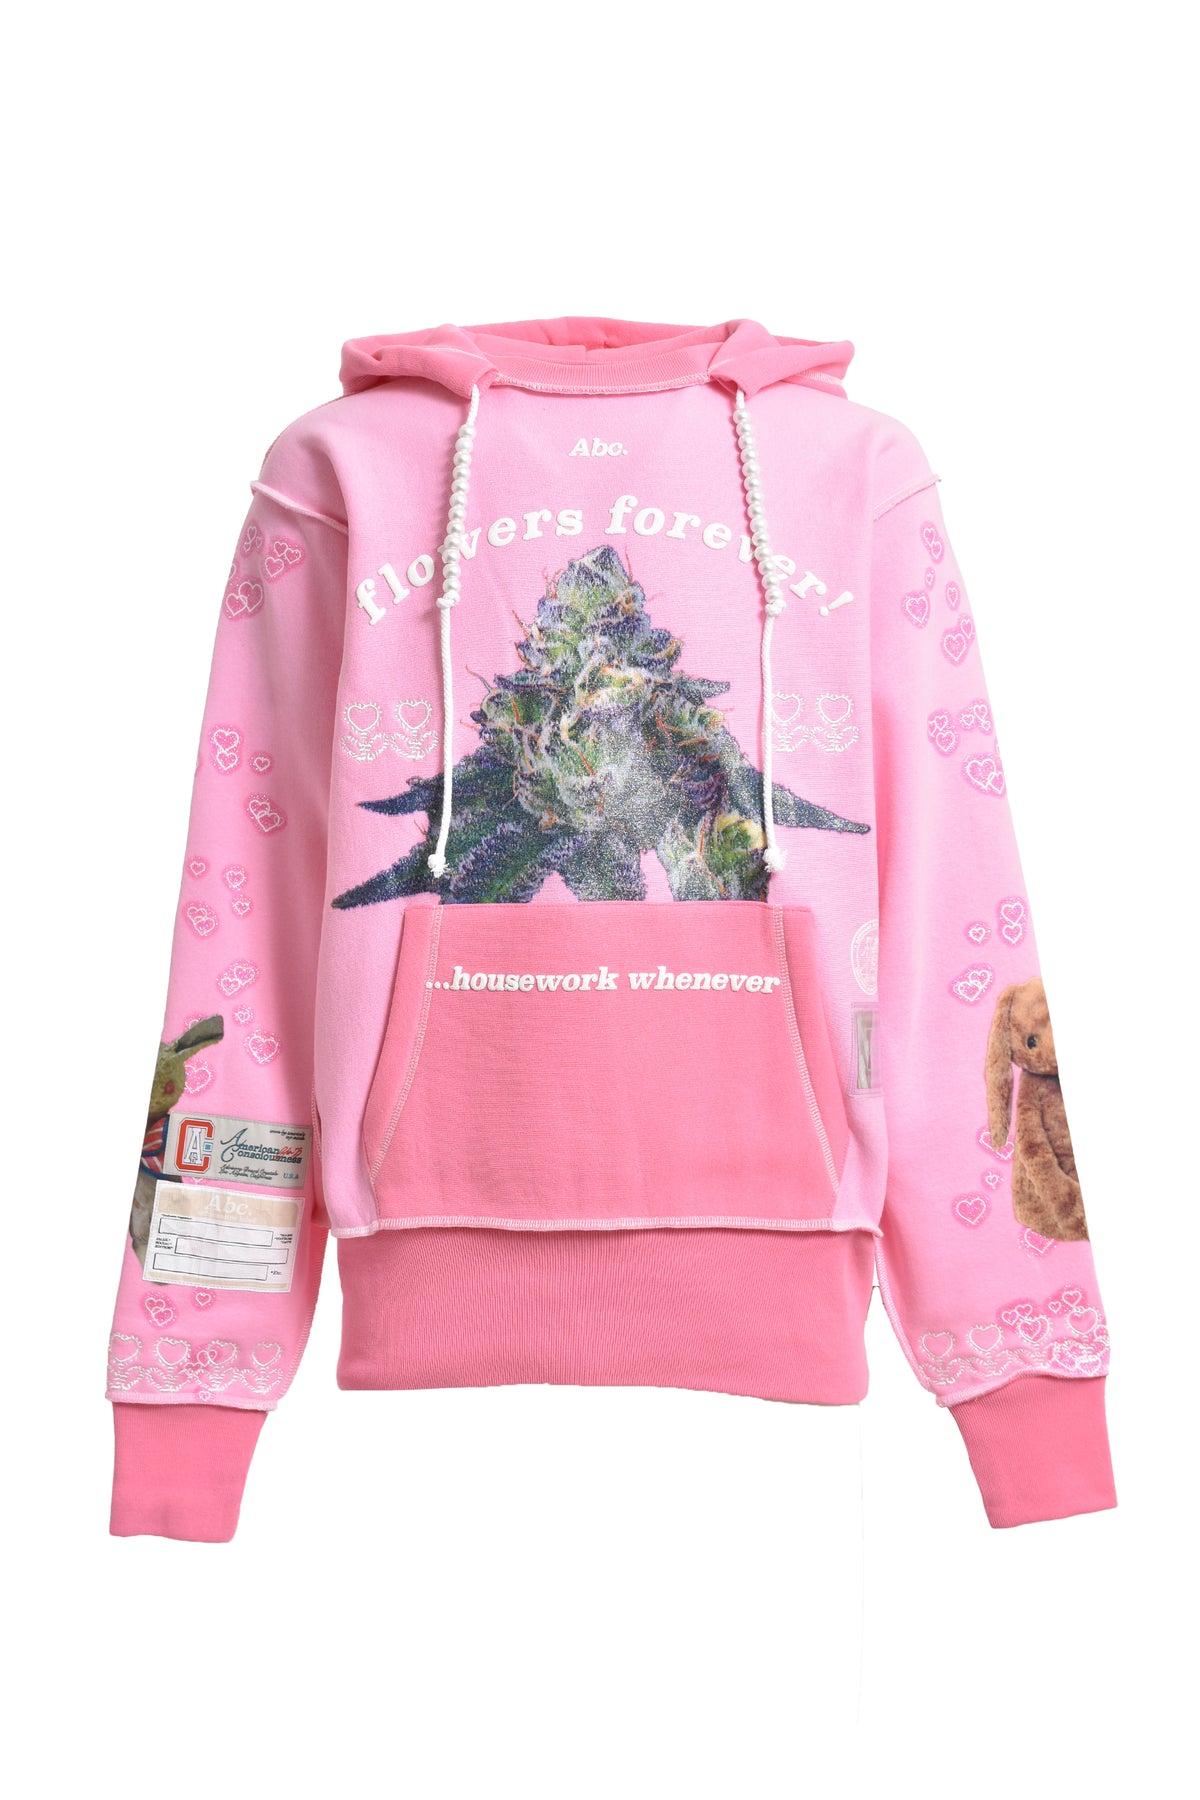 Advisory Board Crystals (ABC.) ABC. FLOWERS FOREVER HOODIE / PNK